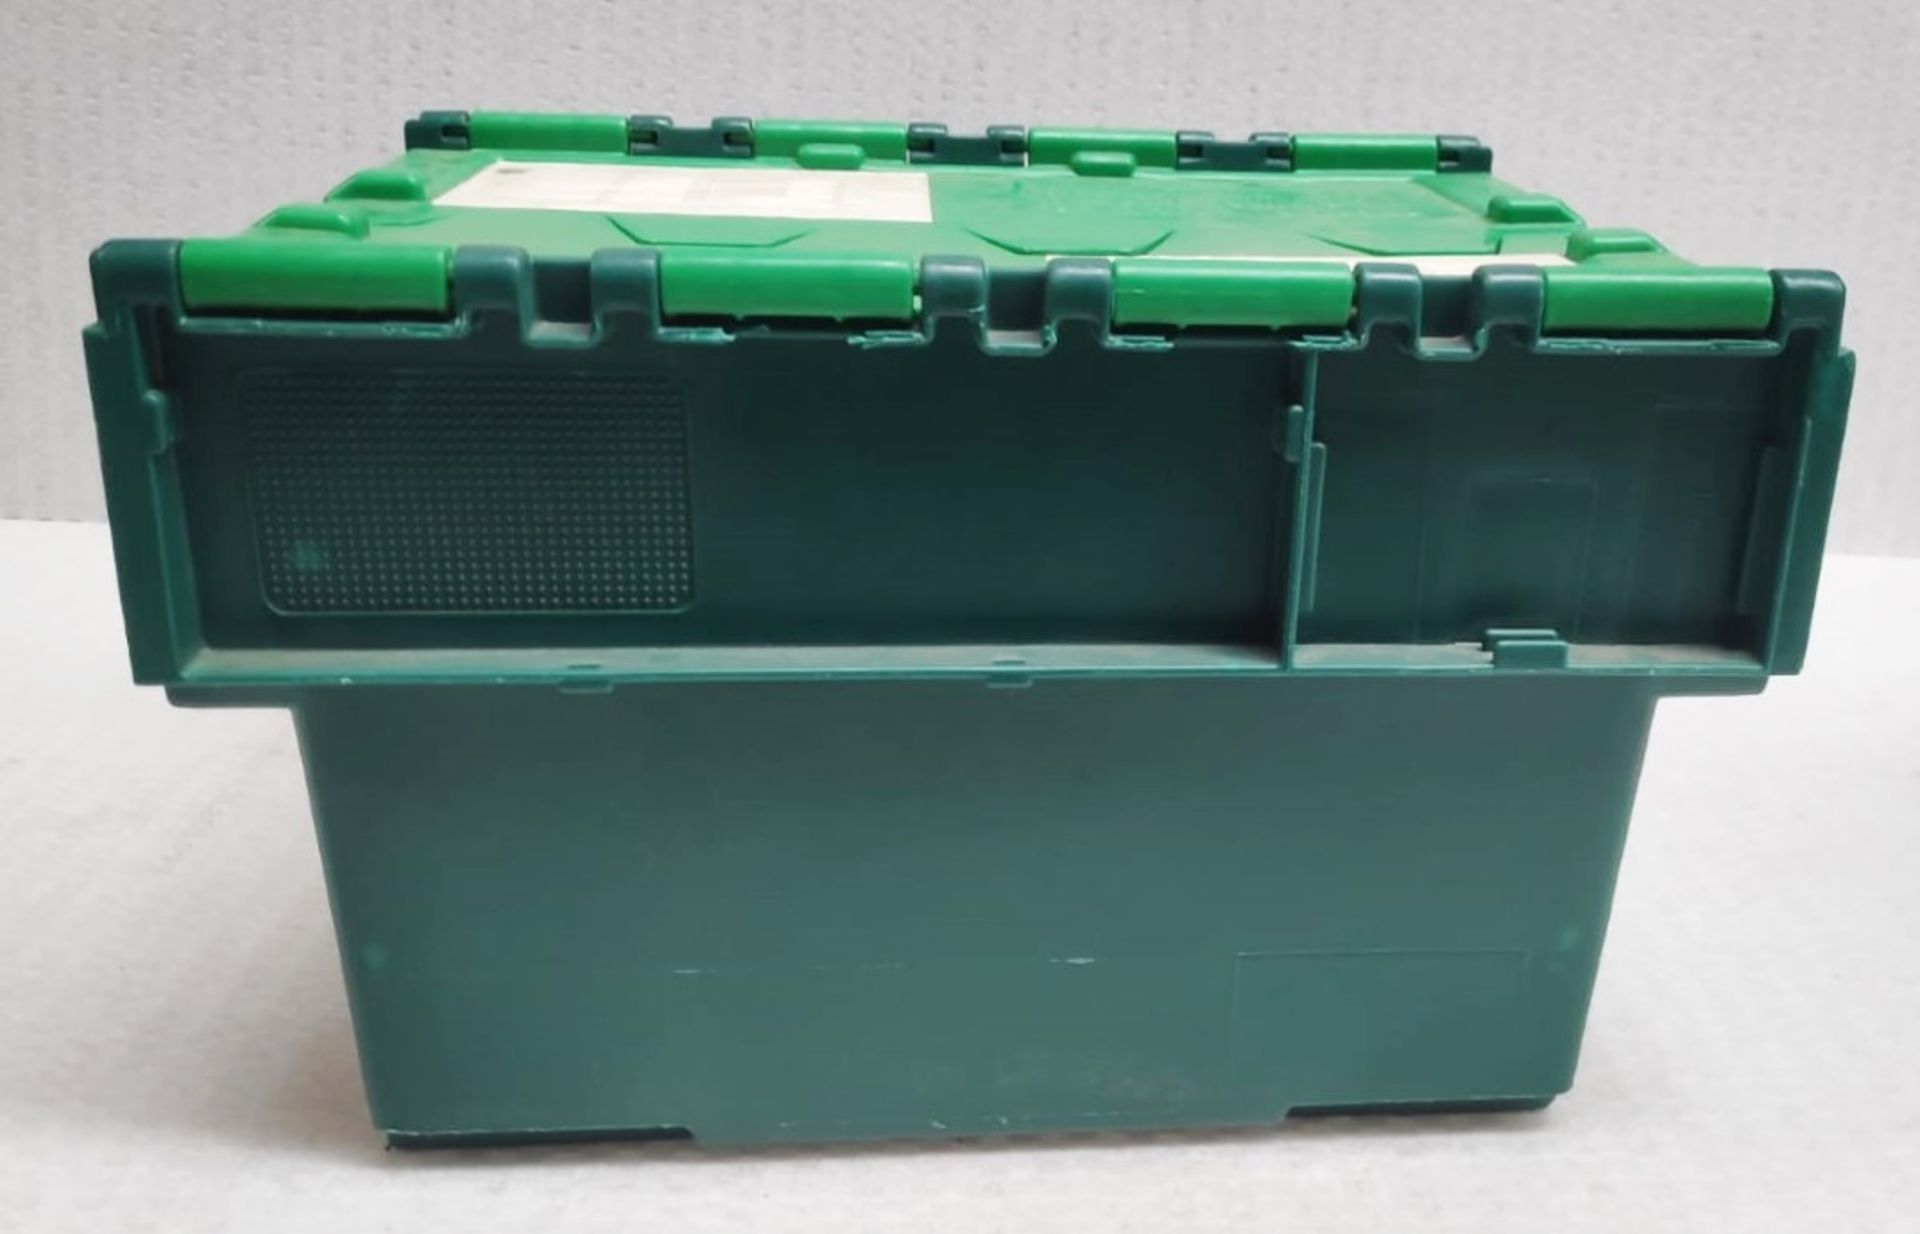 20 x Robust Compact Green Plastic Stackable Secure Storage Boxes With Attached Hinged Lids - Image 2 of 6